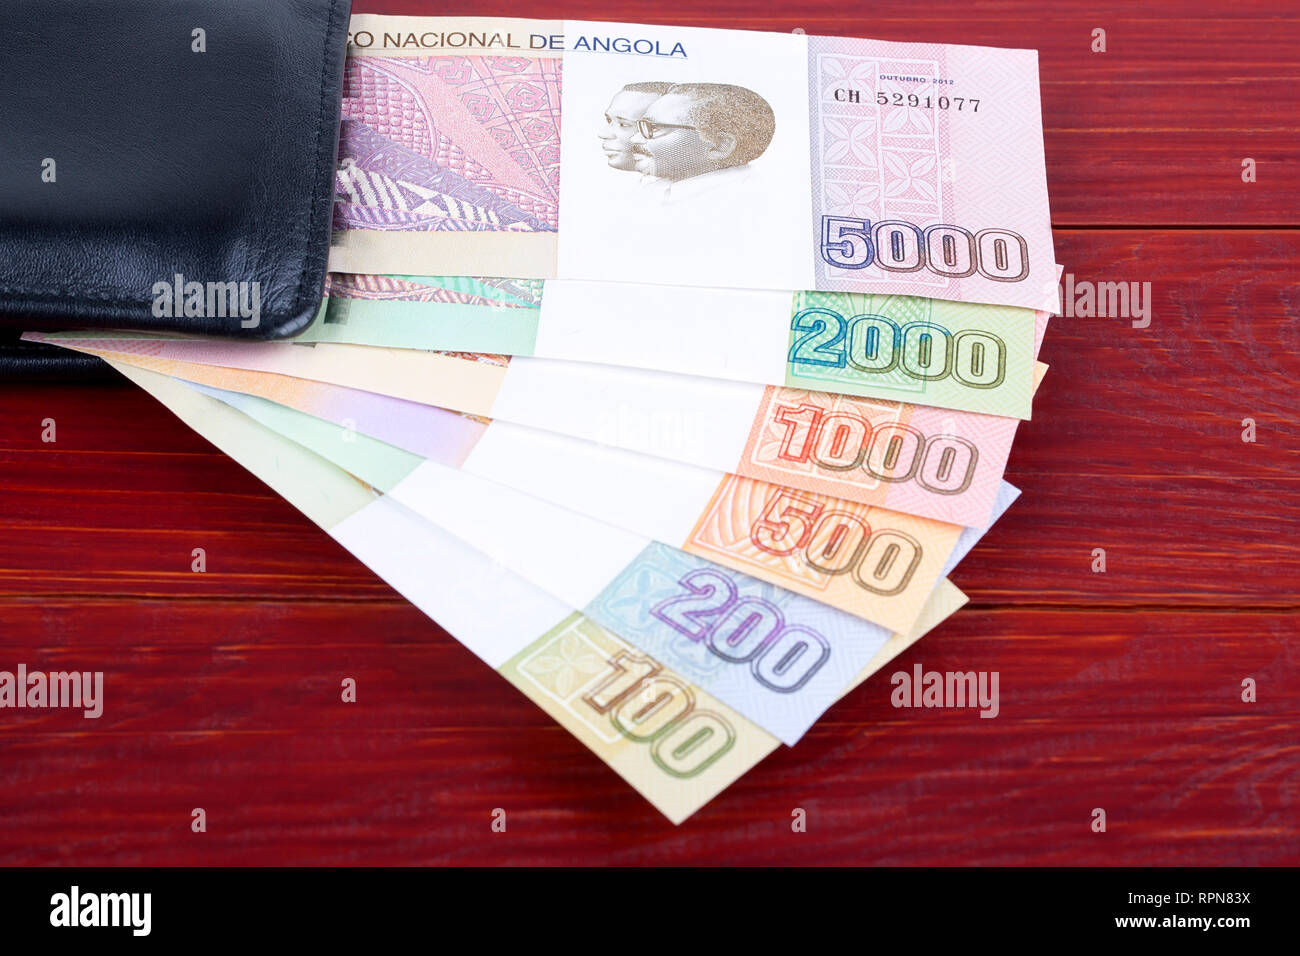 Angolan money in the black wallet Stock Photo